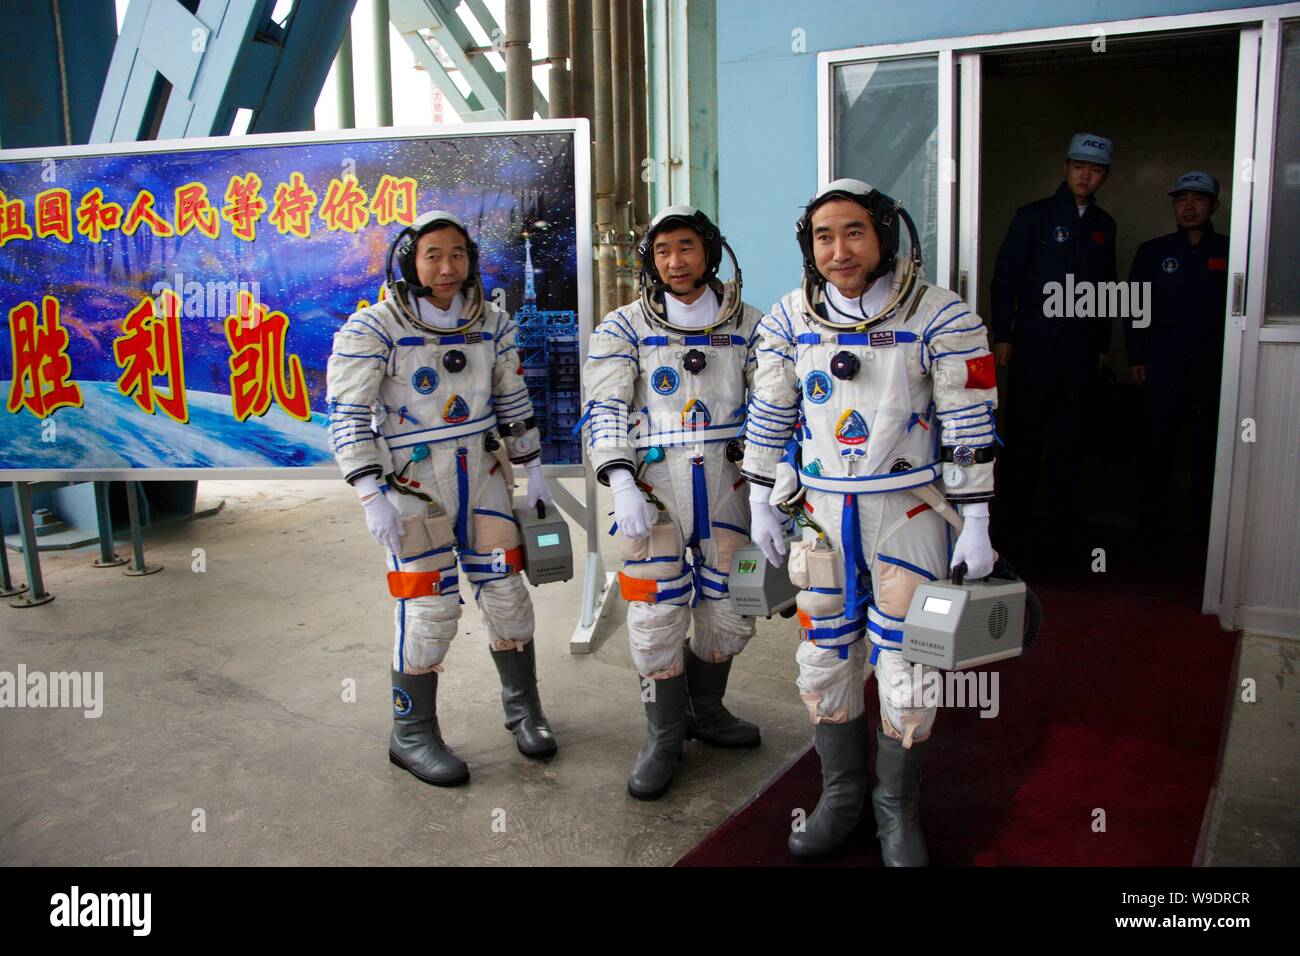 (From L) Chinese taikonauts Jing Haipeng, Liu Boming and Zhai Zhigang are ready to enter the launch pad before the launch of Shenzhou VI manned spacec Stock Photo